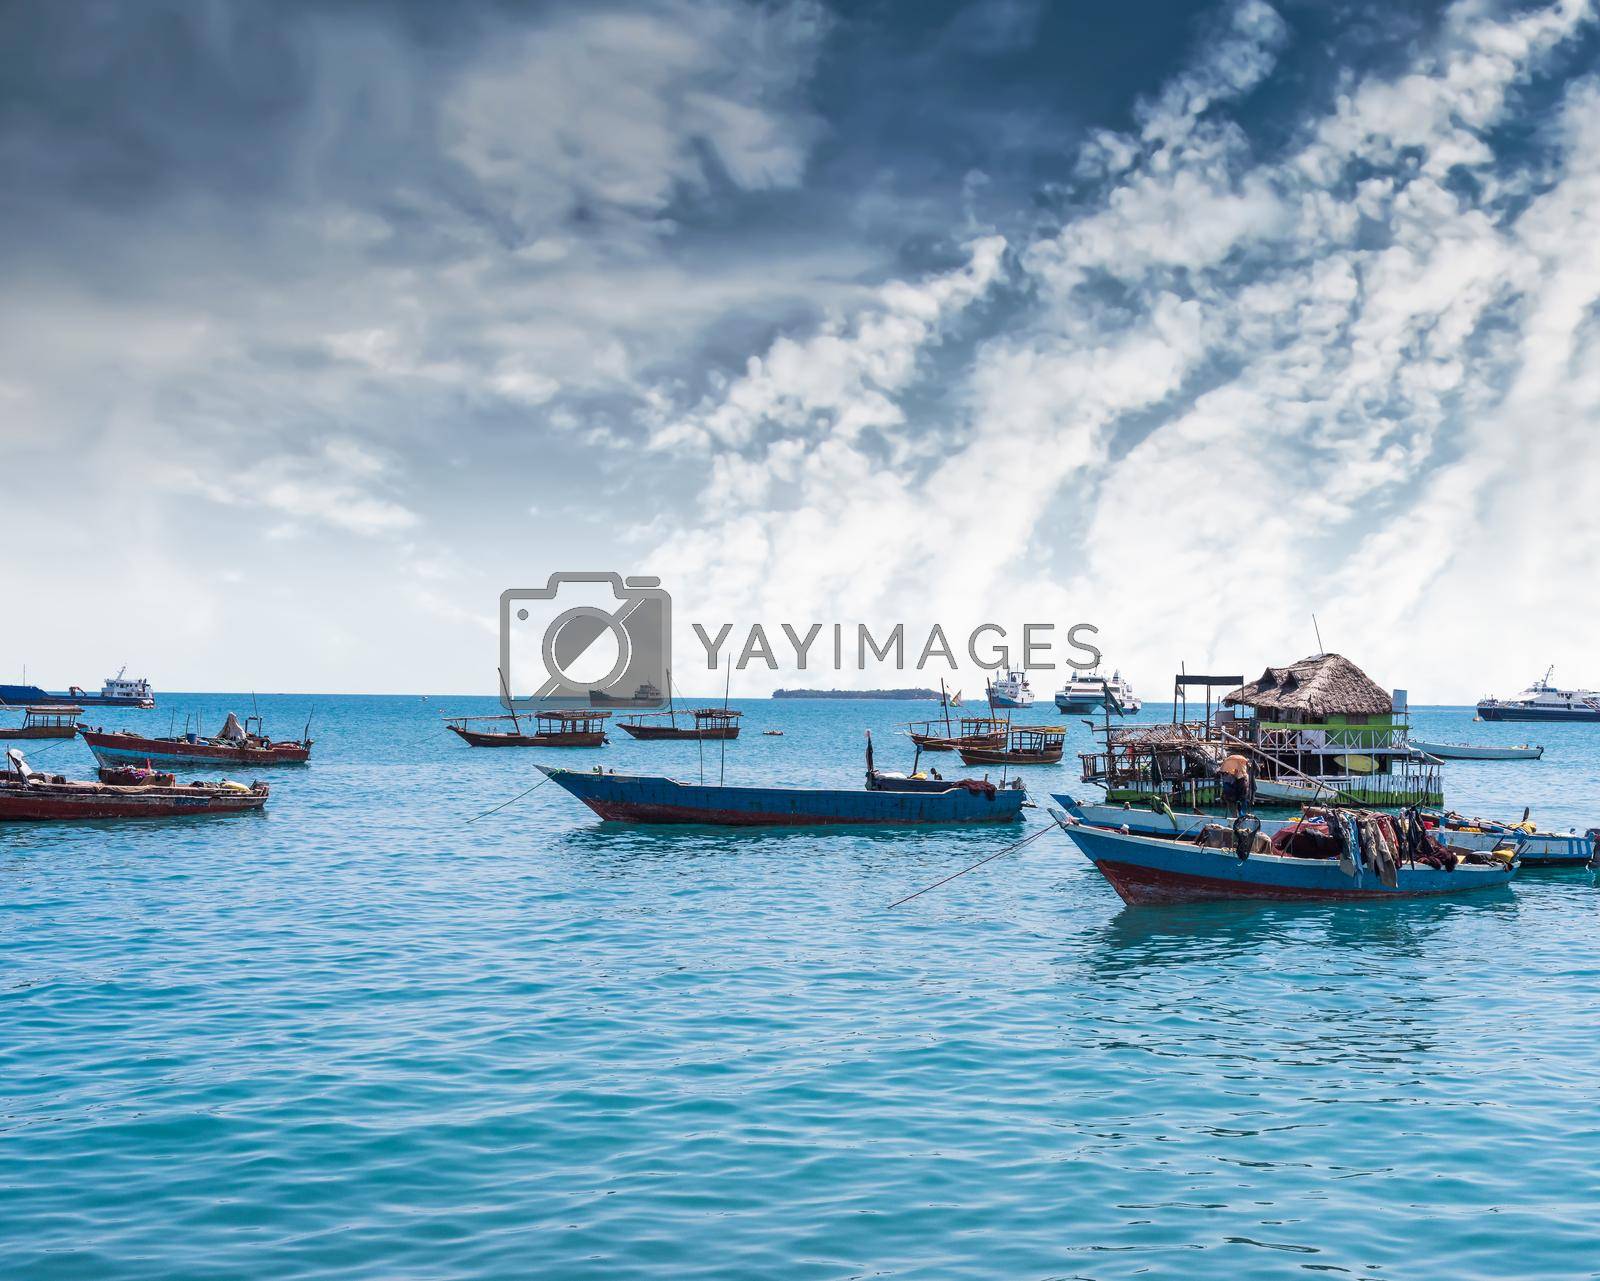 Royalty free image of seascape with many anchored fishing boats by GekaSkr